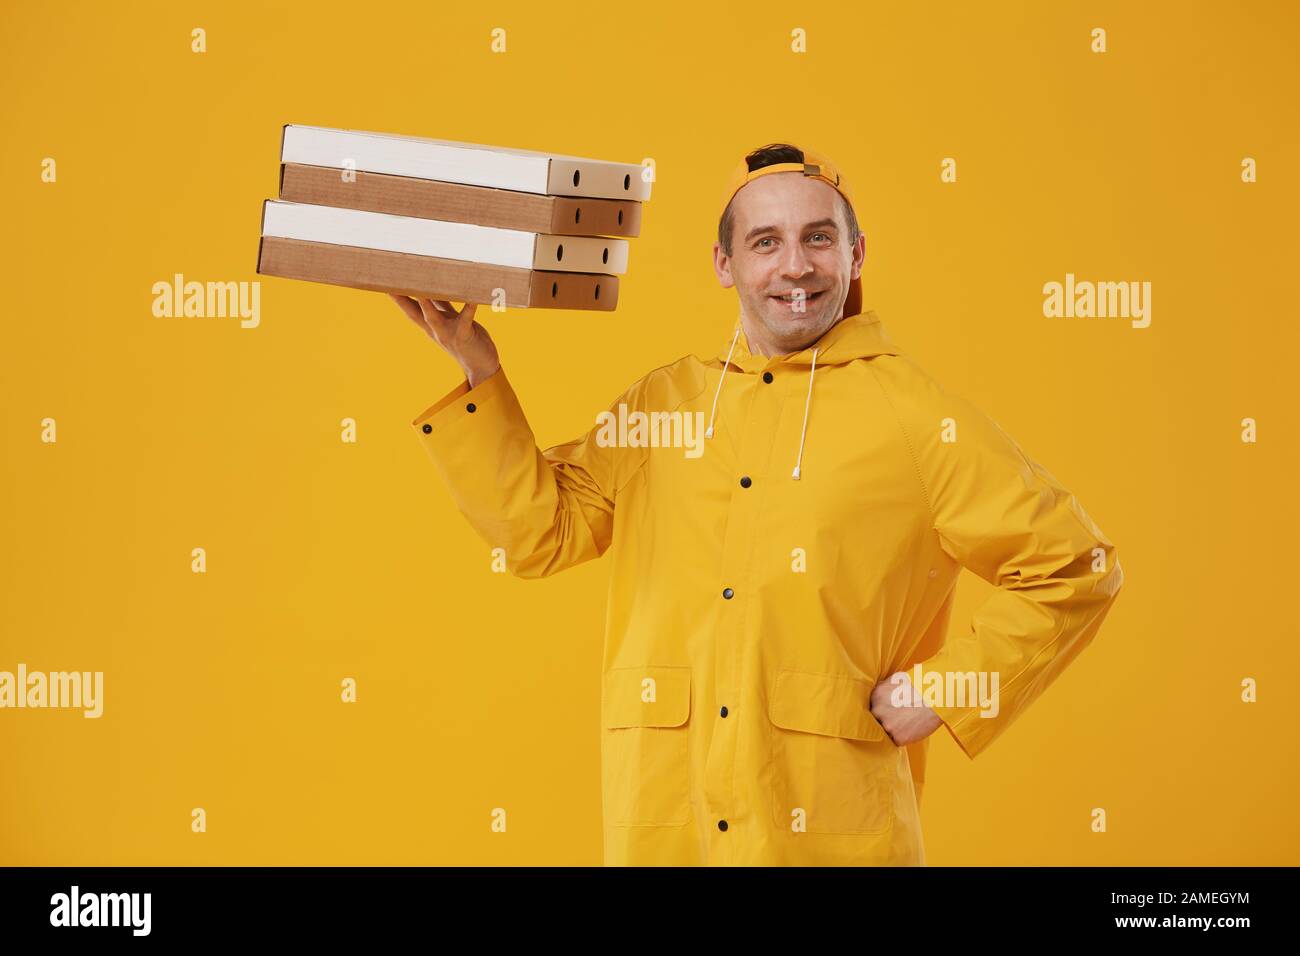 Waist up portrait of cheerful delivery man holding pizza boxes high on one hand and smiling at camera while posing against yellow background, copy space Stock Photo